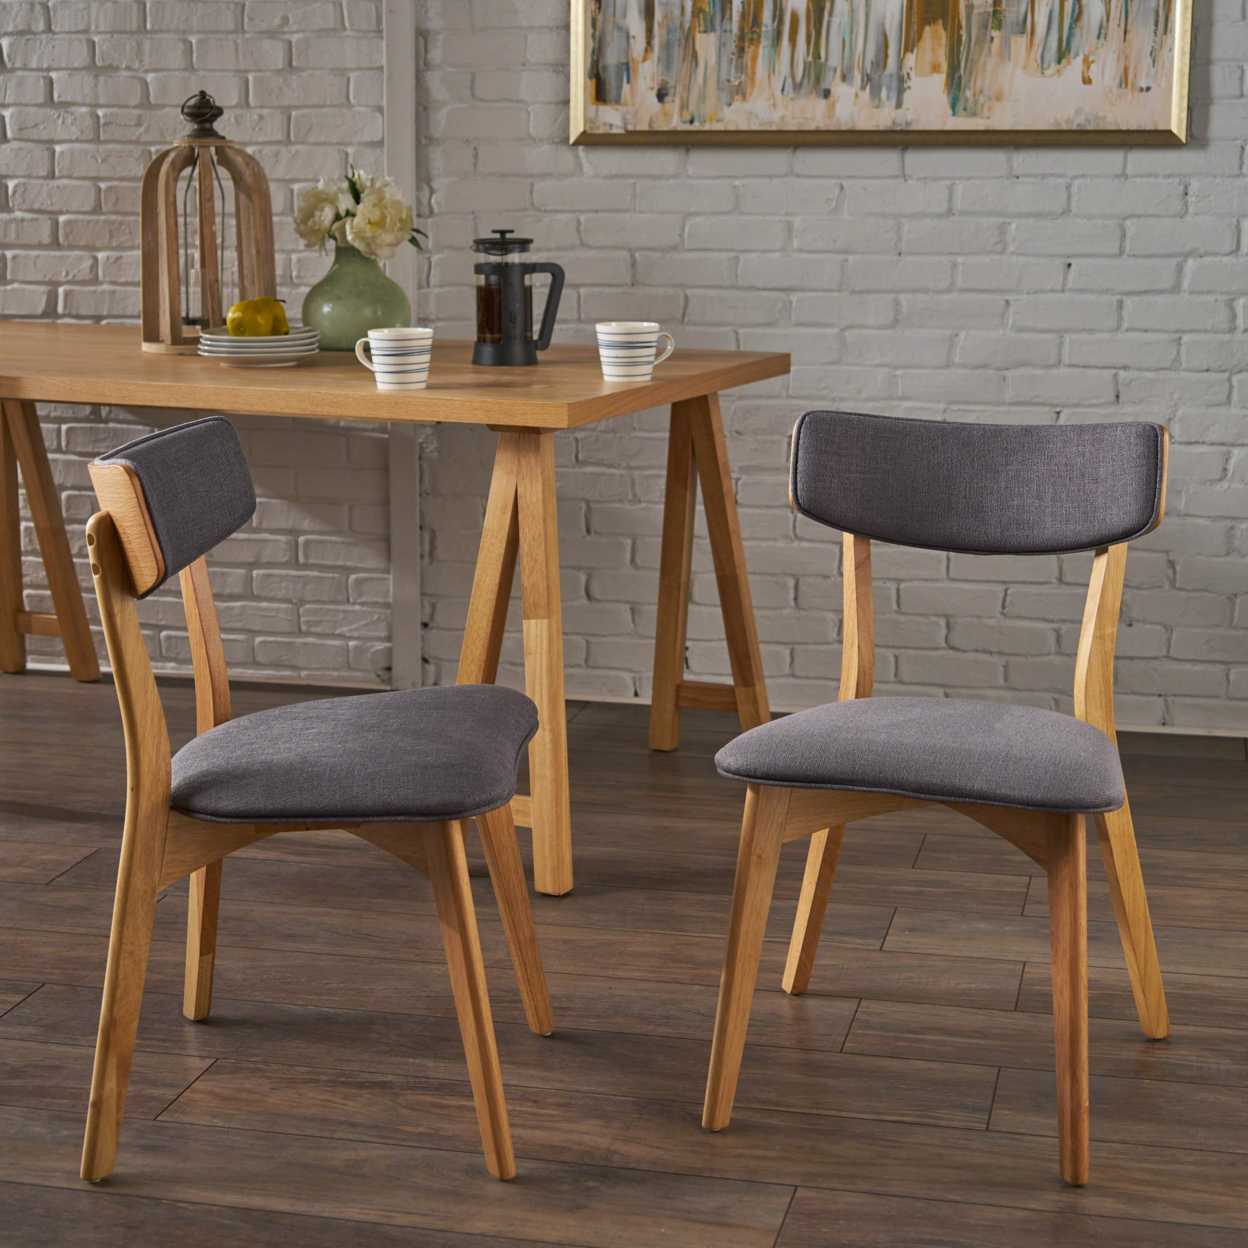 Molly Mid Century Modern Dining Chairs With Rubberwood Frame (Set Of 2) - Dark Grey/Natural Walnut